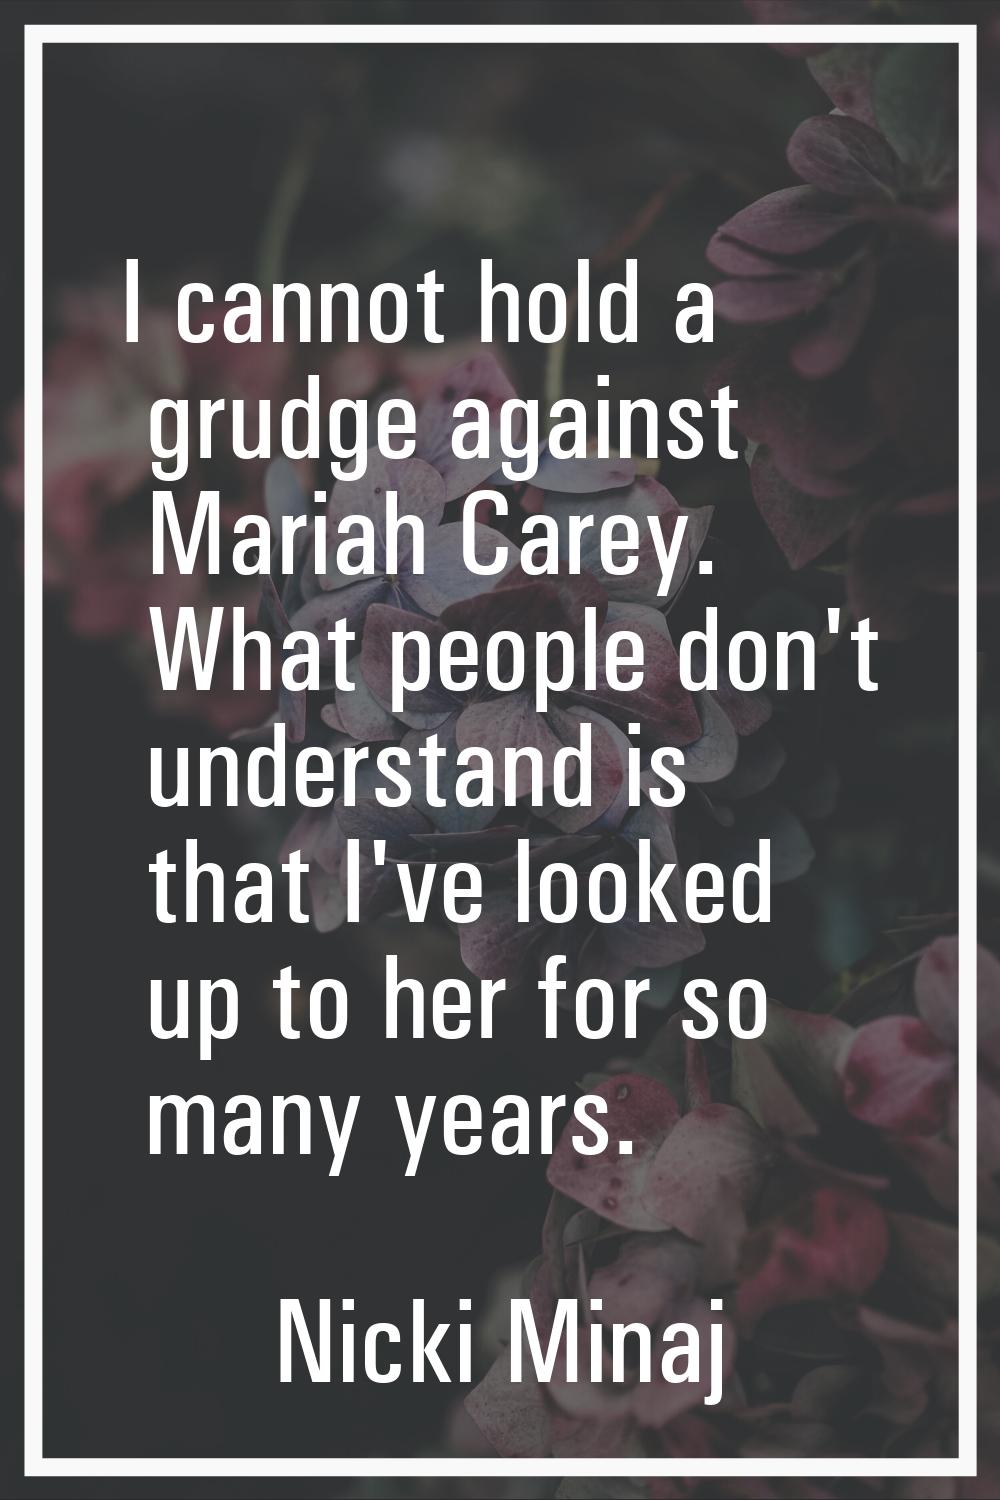 I cannot hold a grudge against Mariah Carey. What people don't understand is that I've looked up to